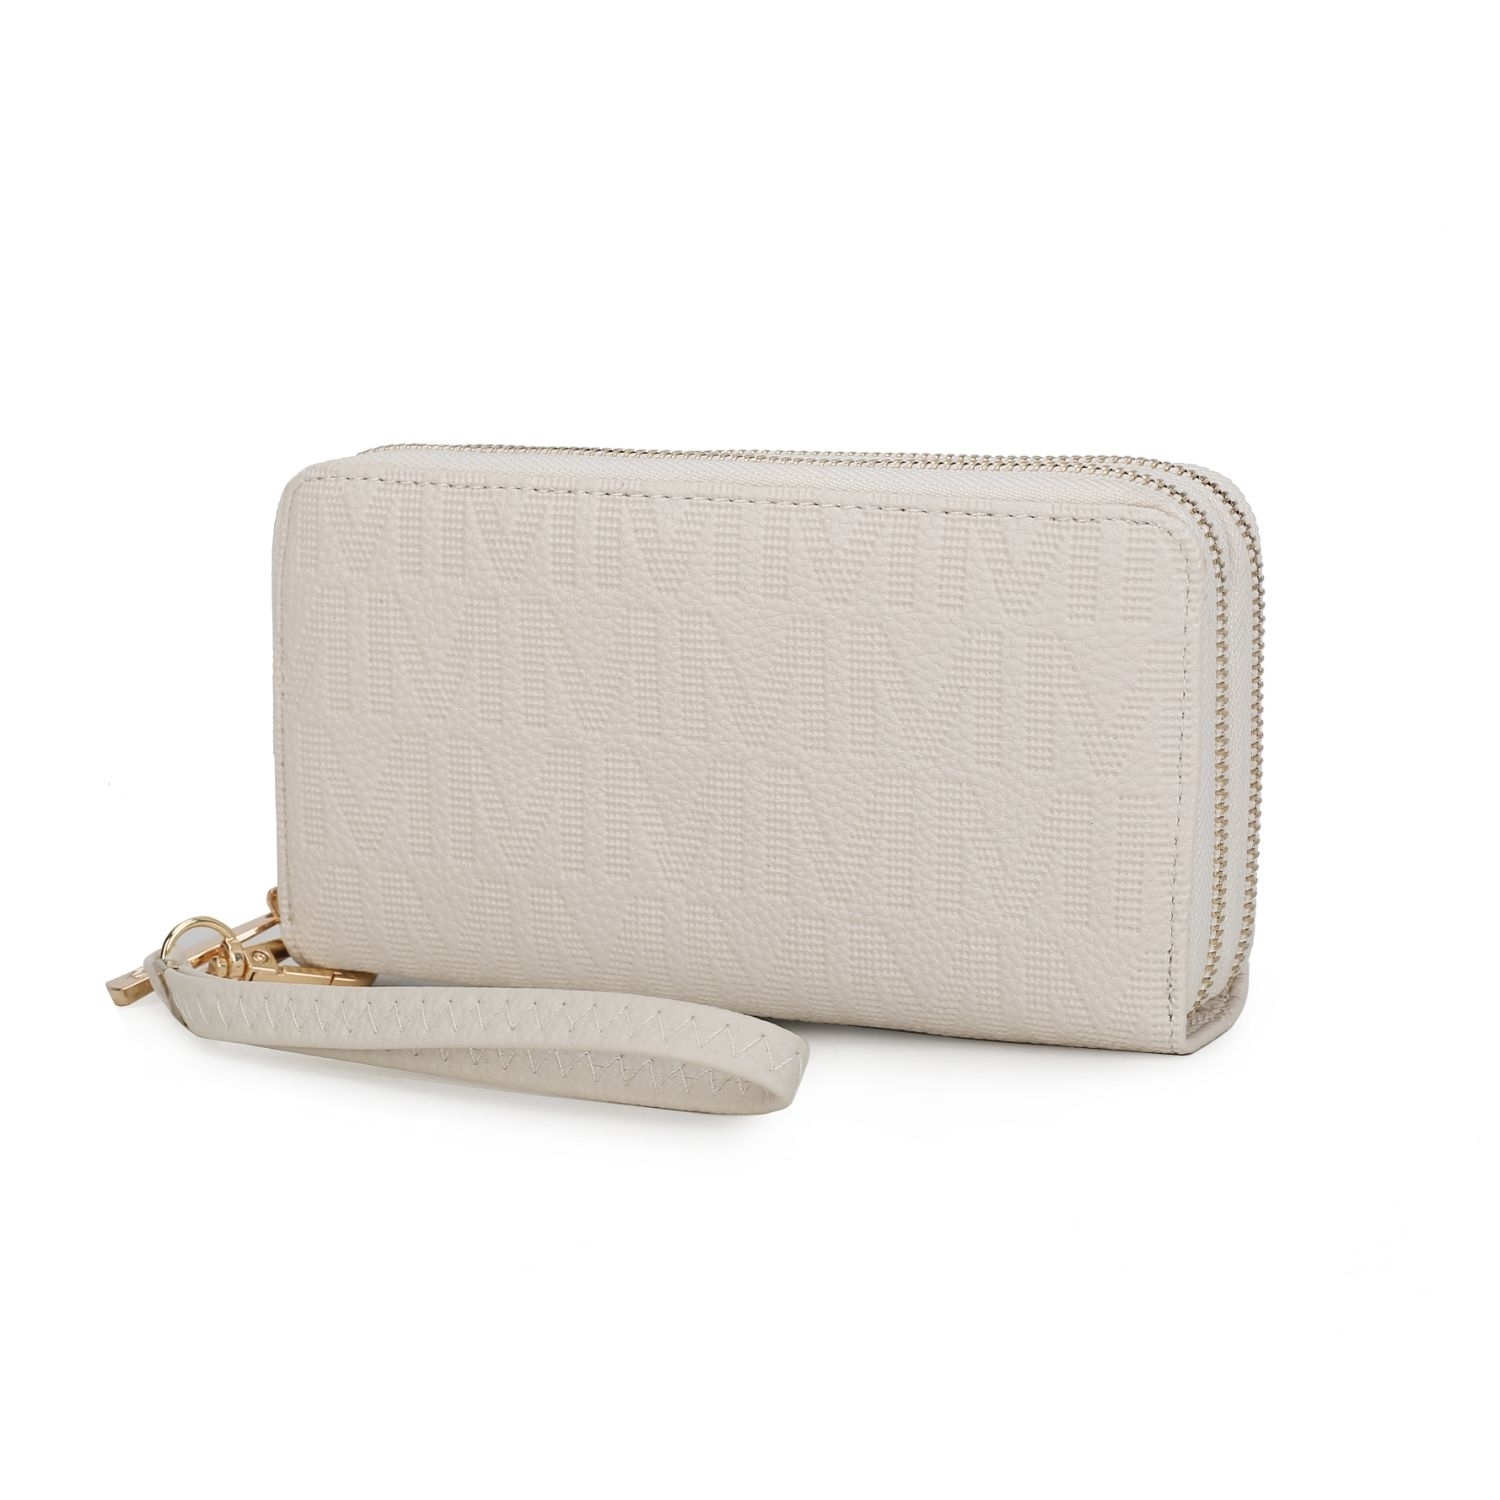 MKF Collection Lisbette Embossed M Signature Wallet By Mia K. Handbag - Chocolate